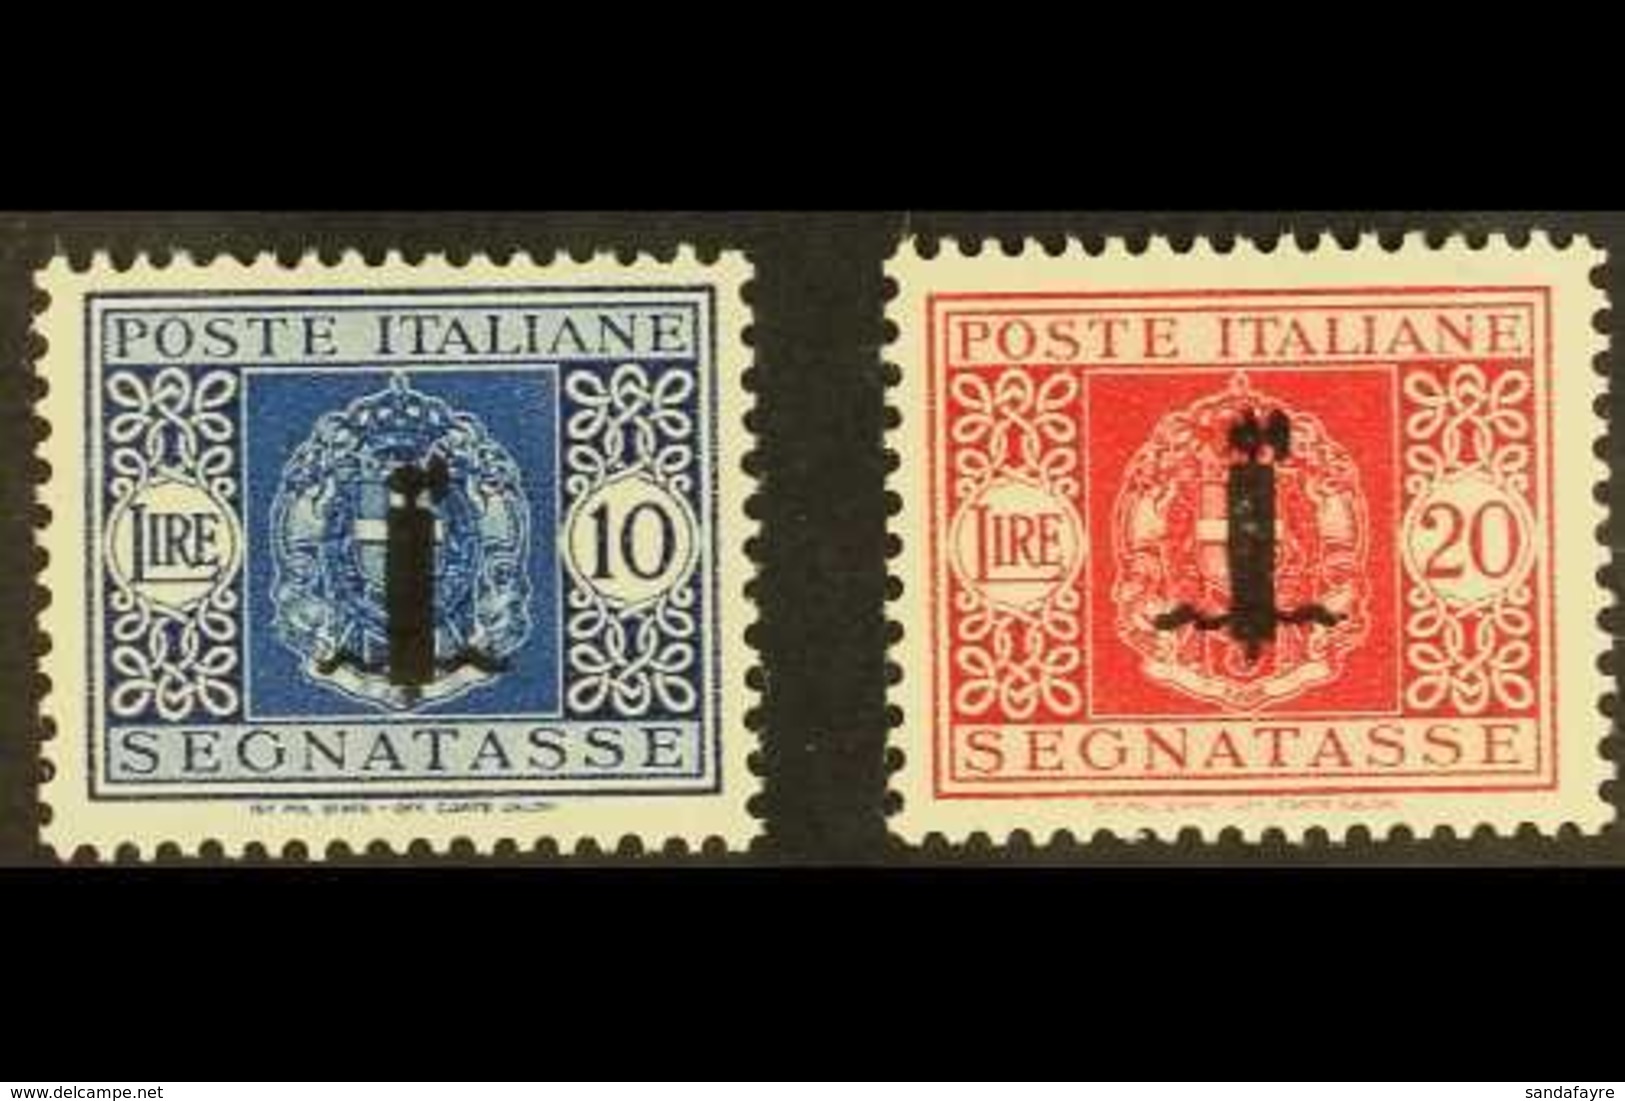 SOCIAL REPUBLIC POSTAGE DUES 1944 10L Blue & 20L Carmine, Sassone 71/2, Mi 48/9, Never Hinged Mint (2 Stamps). For More  - Sin Clasificación